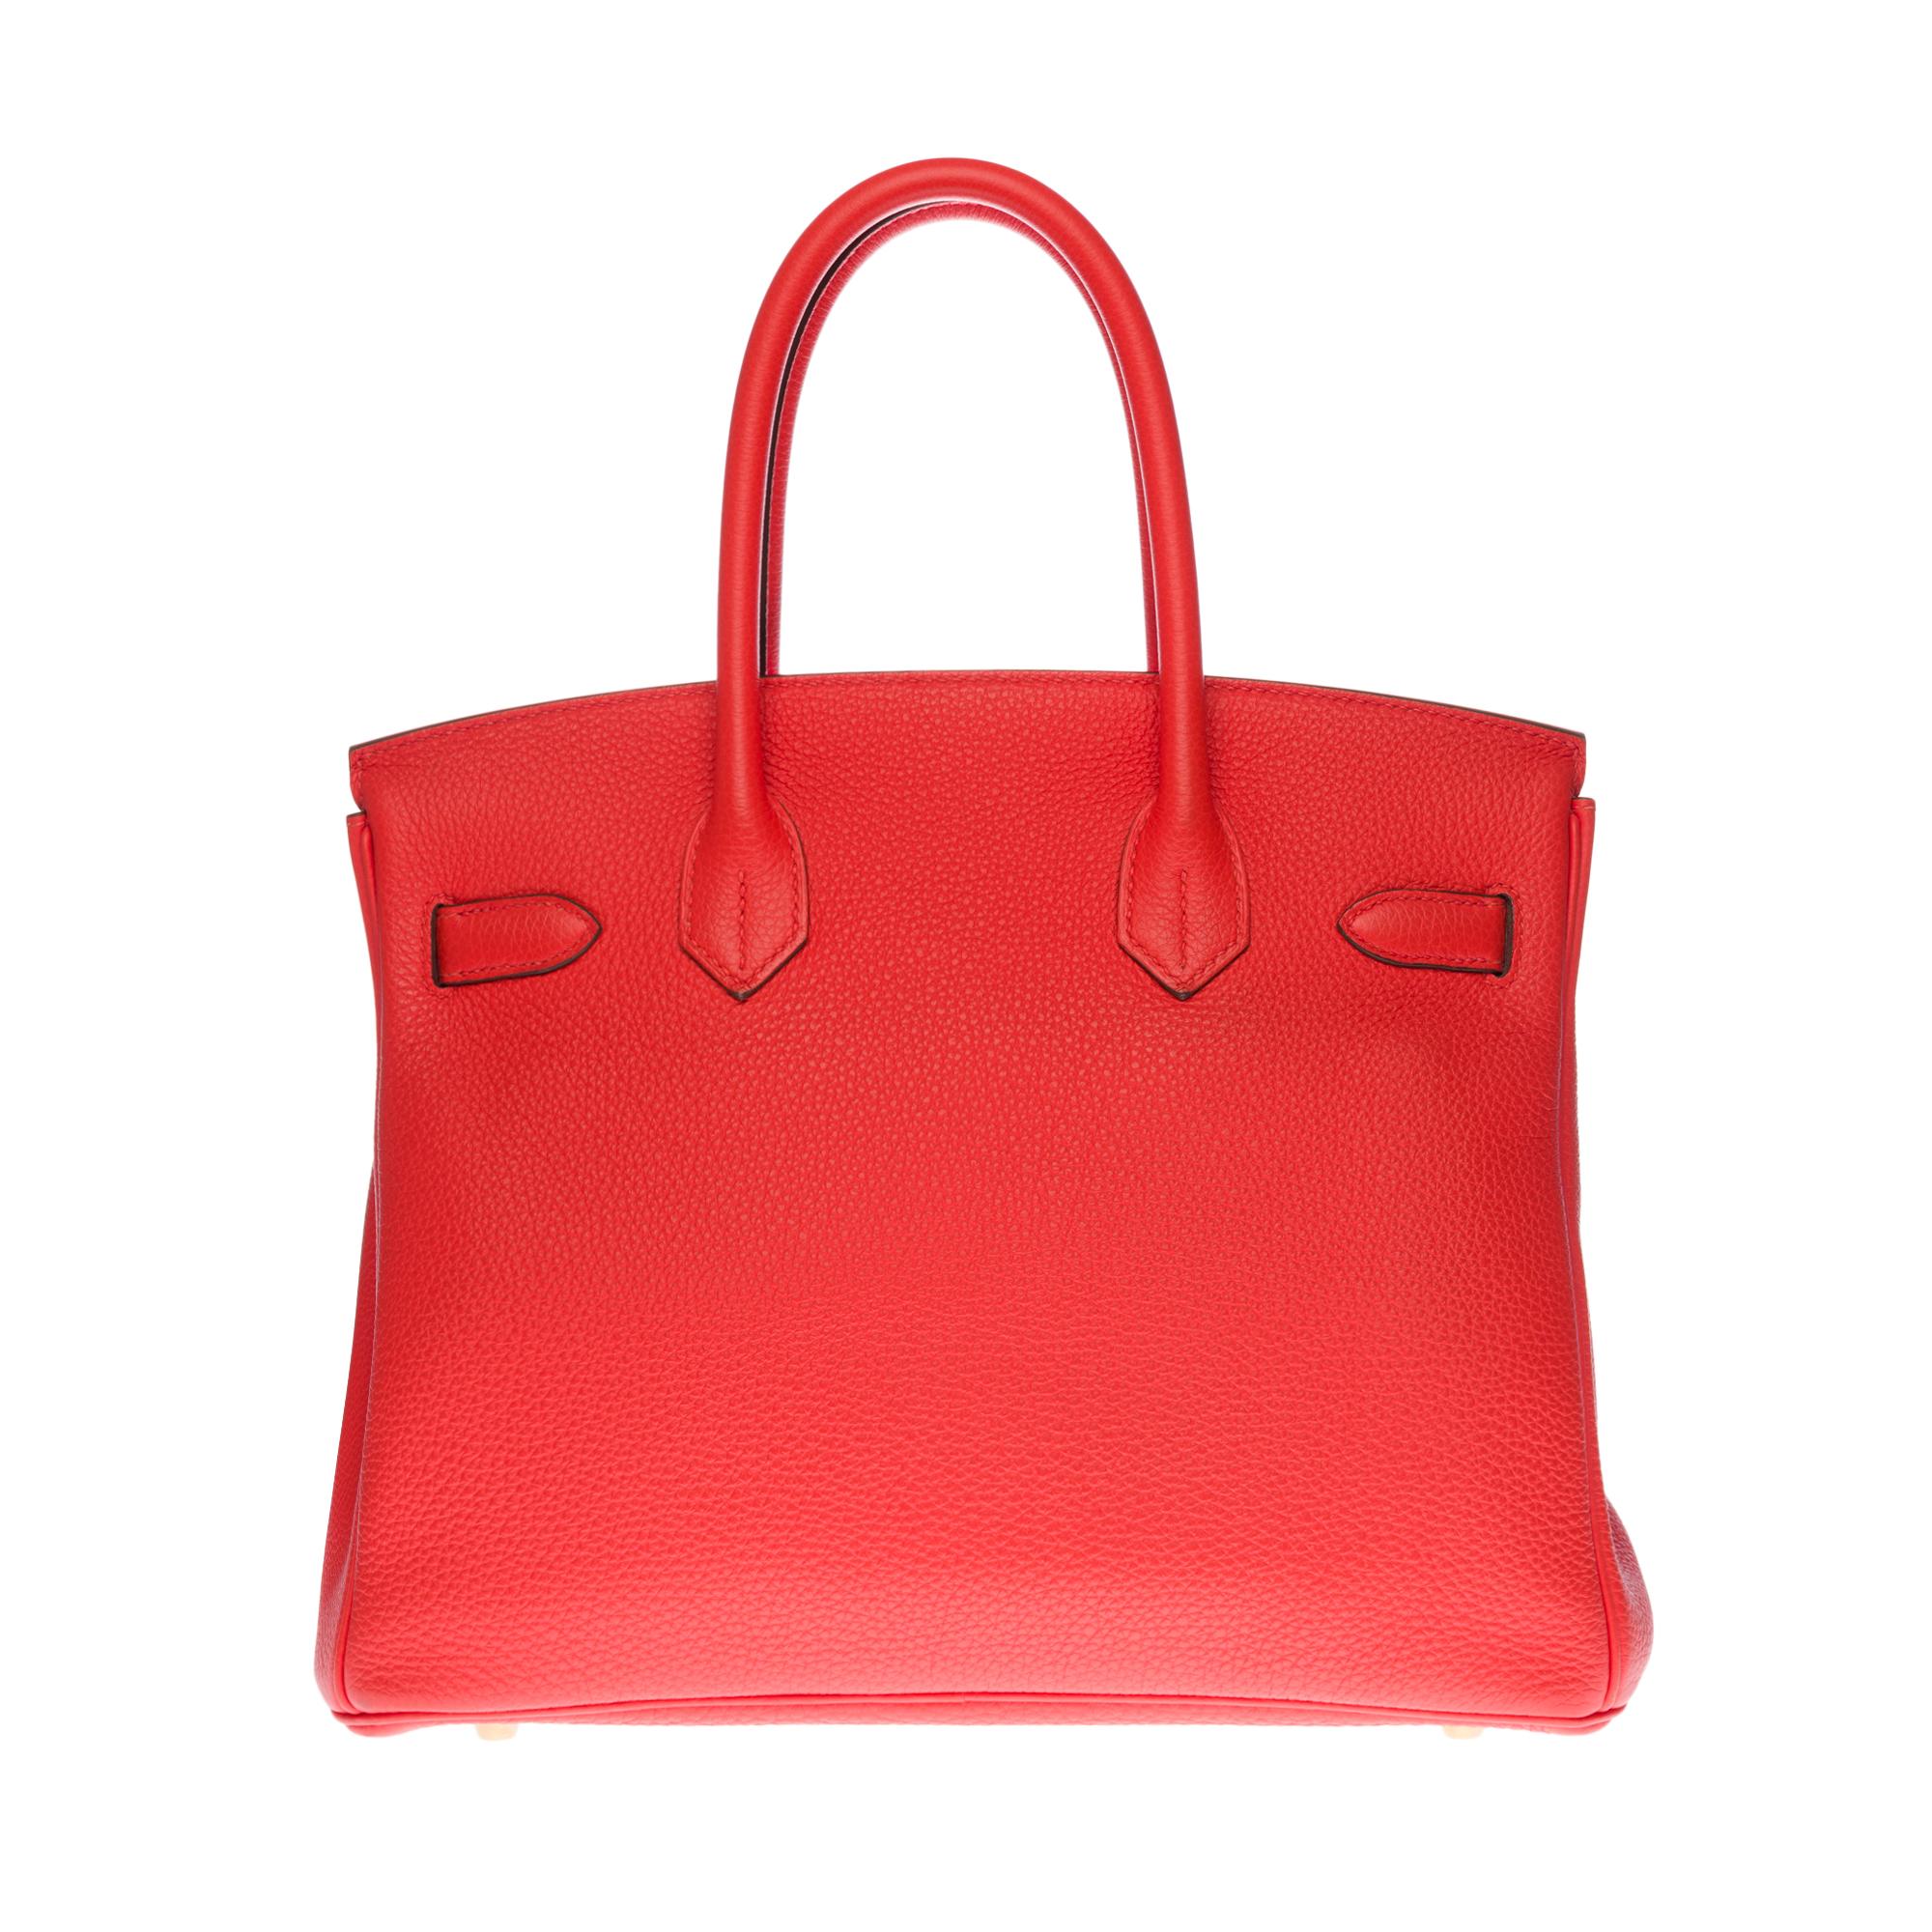 Beautiful Hermes Birkin 30 handbag in red Togo Capuchin leather, gold-plated metal hardware, double handle in red leather allowing a handheld
Flap closure
Lining in red H leather, one zip pocket, one patch pocket
Signature: 